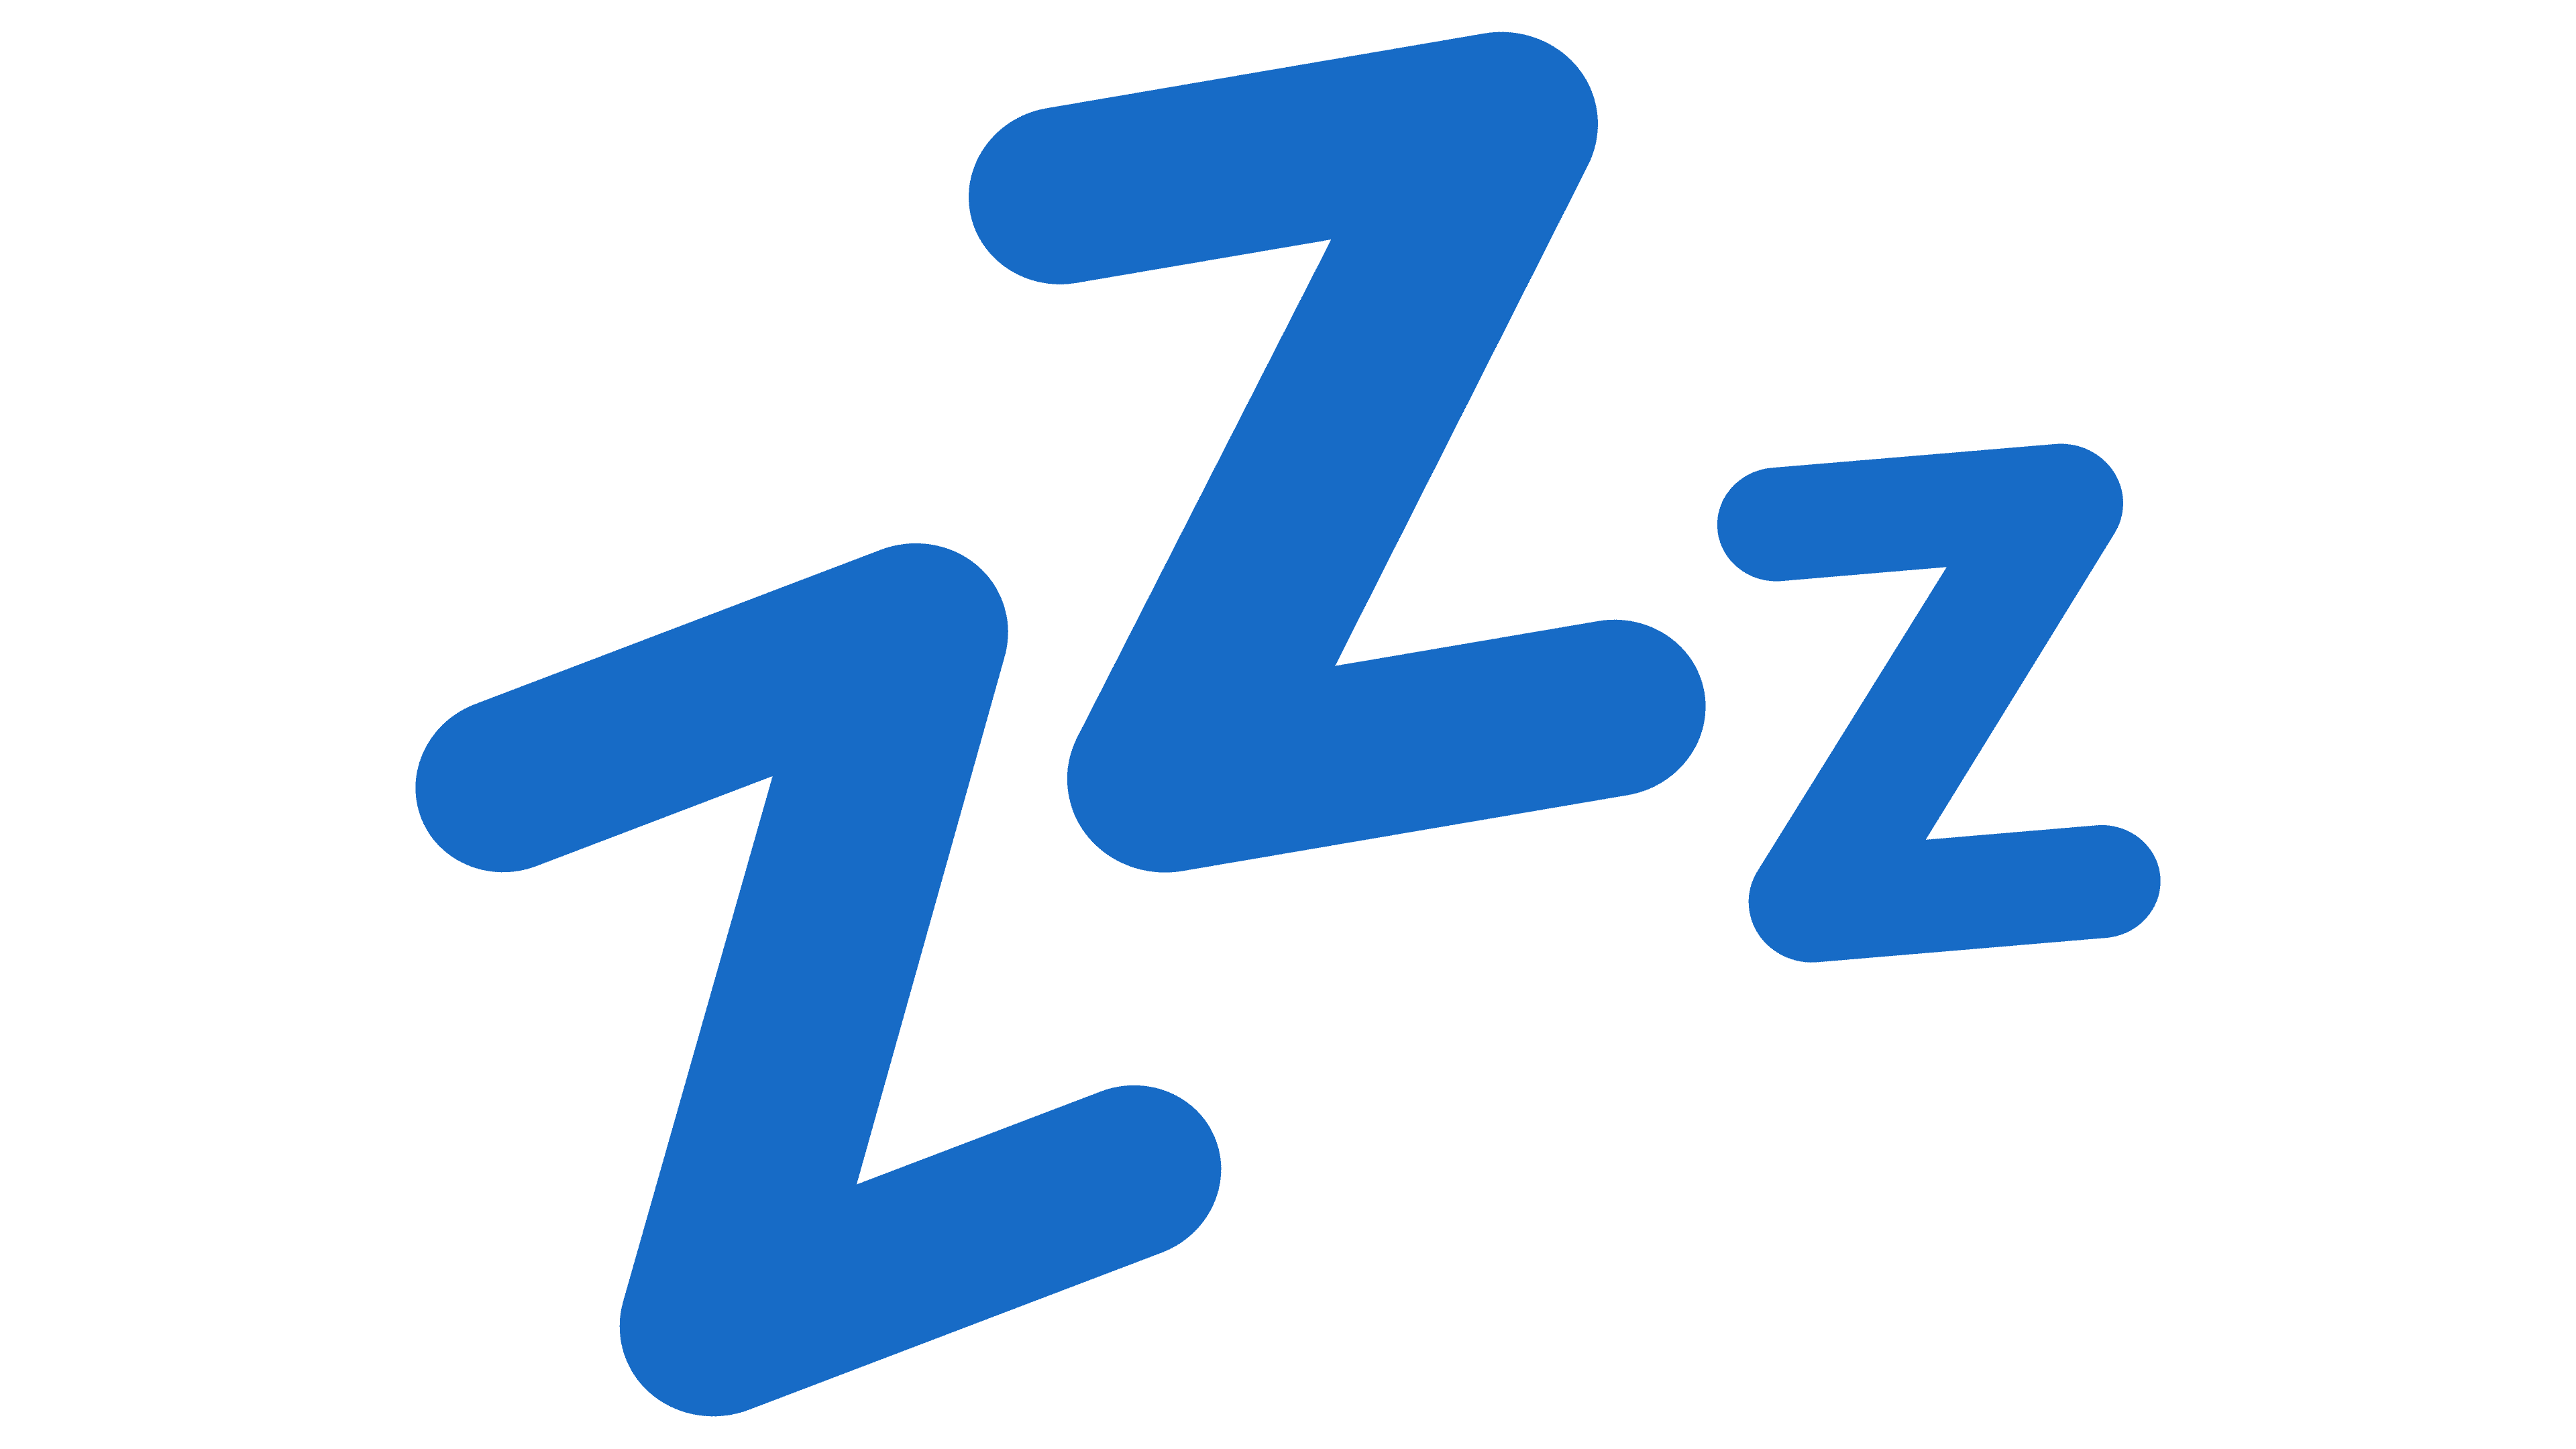 Sleep Emoji - what it means and how to use it